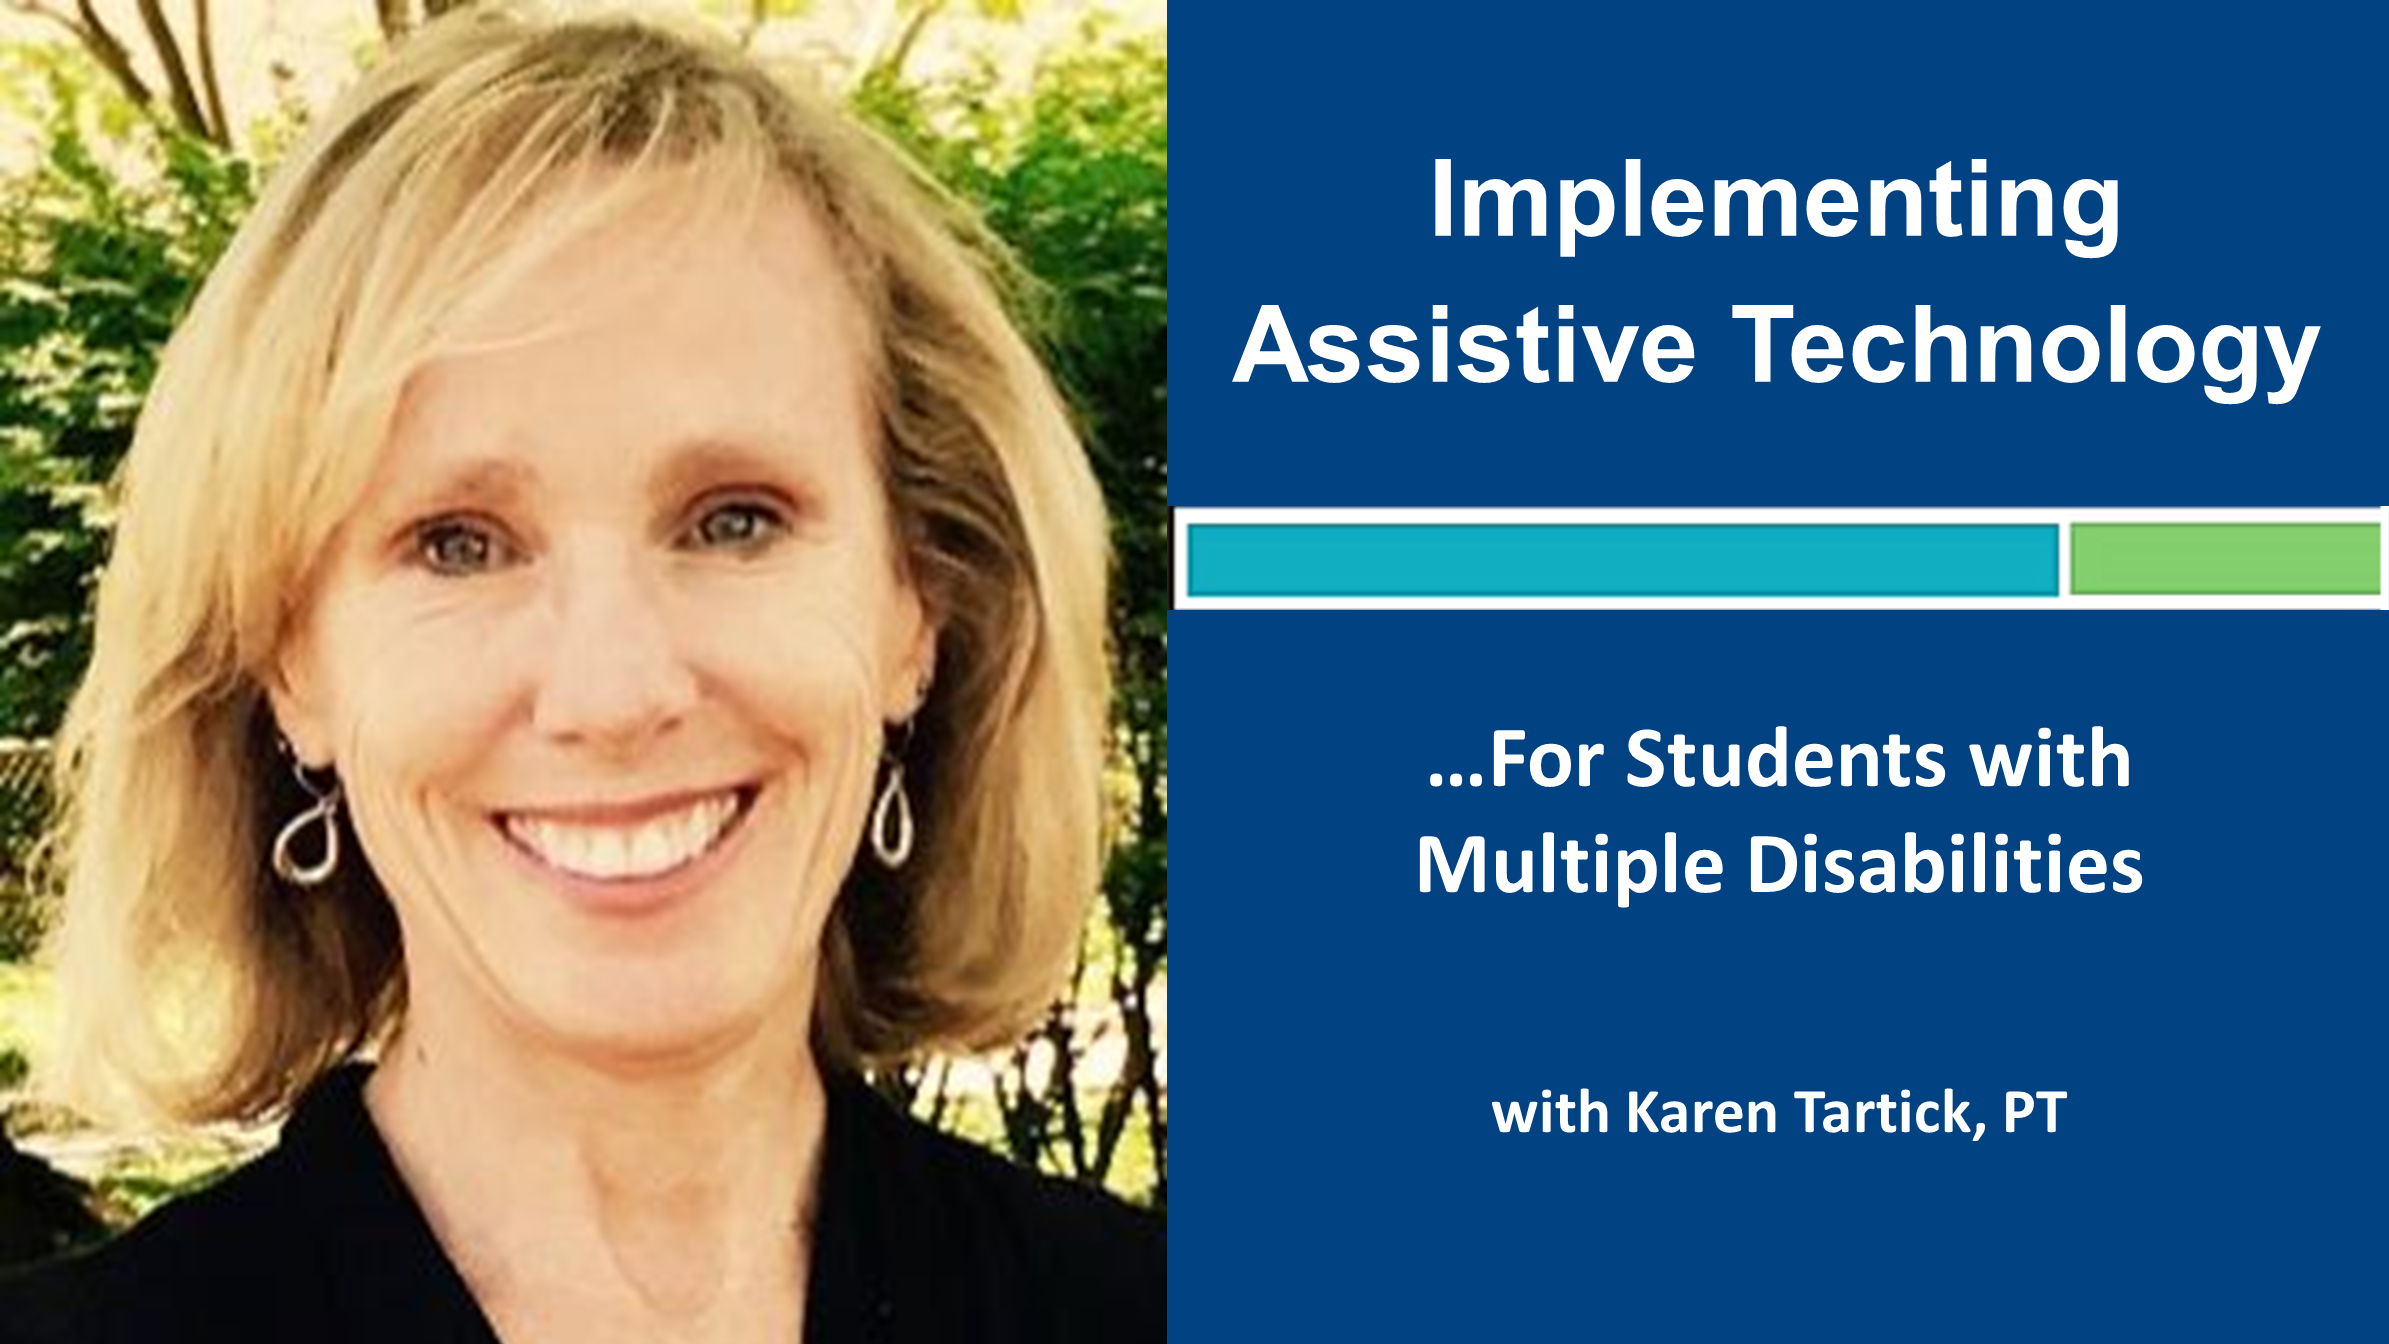 Webinar 5: Implementing Assistive Technology for Students with Multiple Disabilities with Karen Tartick, PT